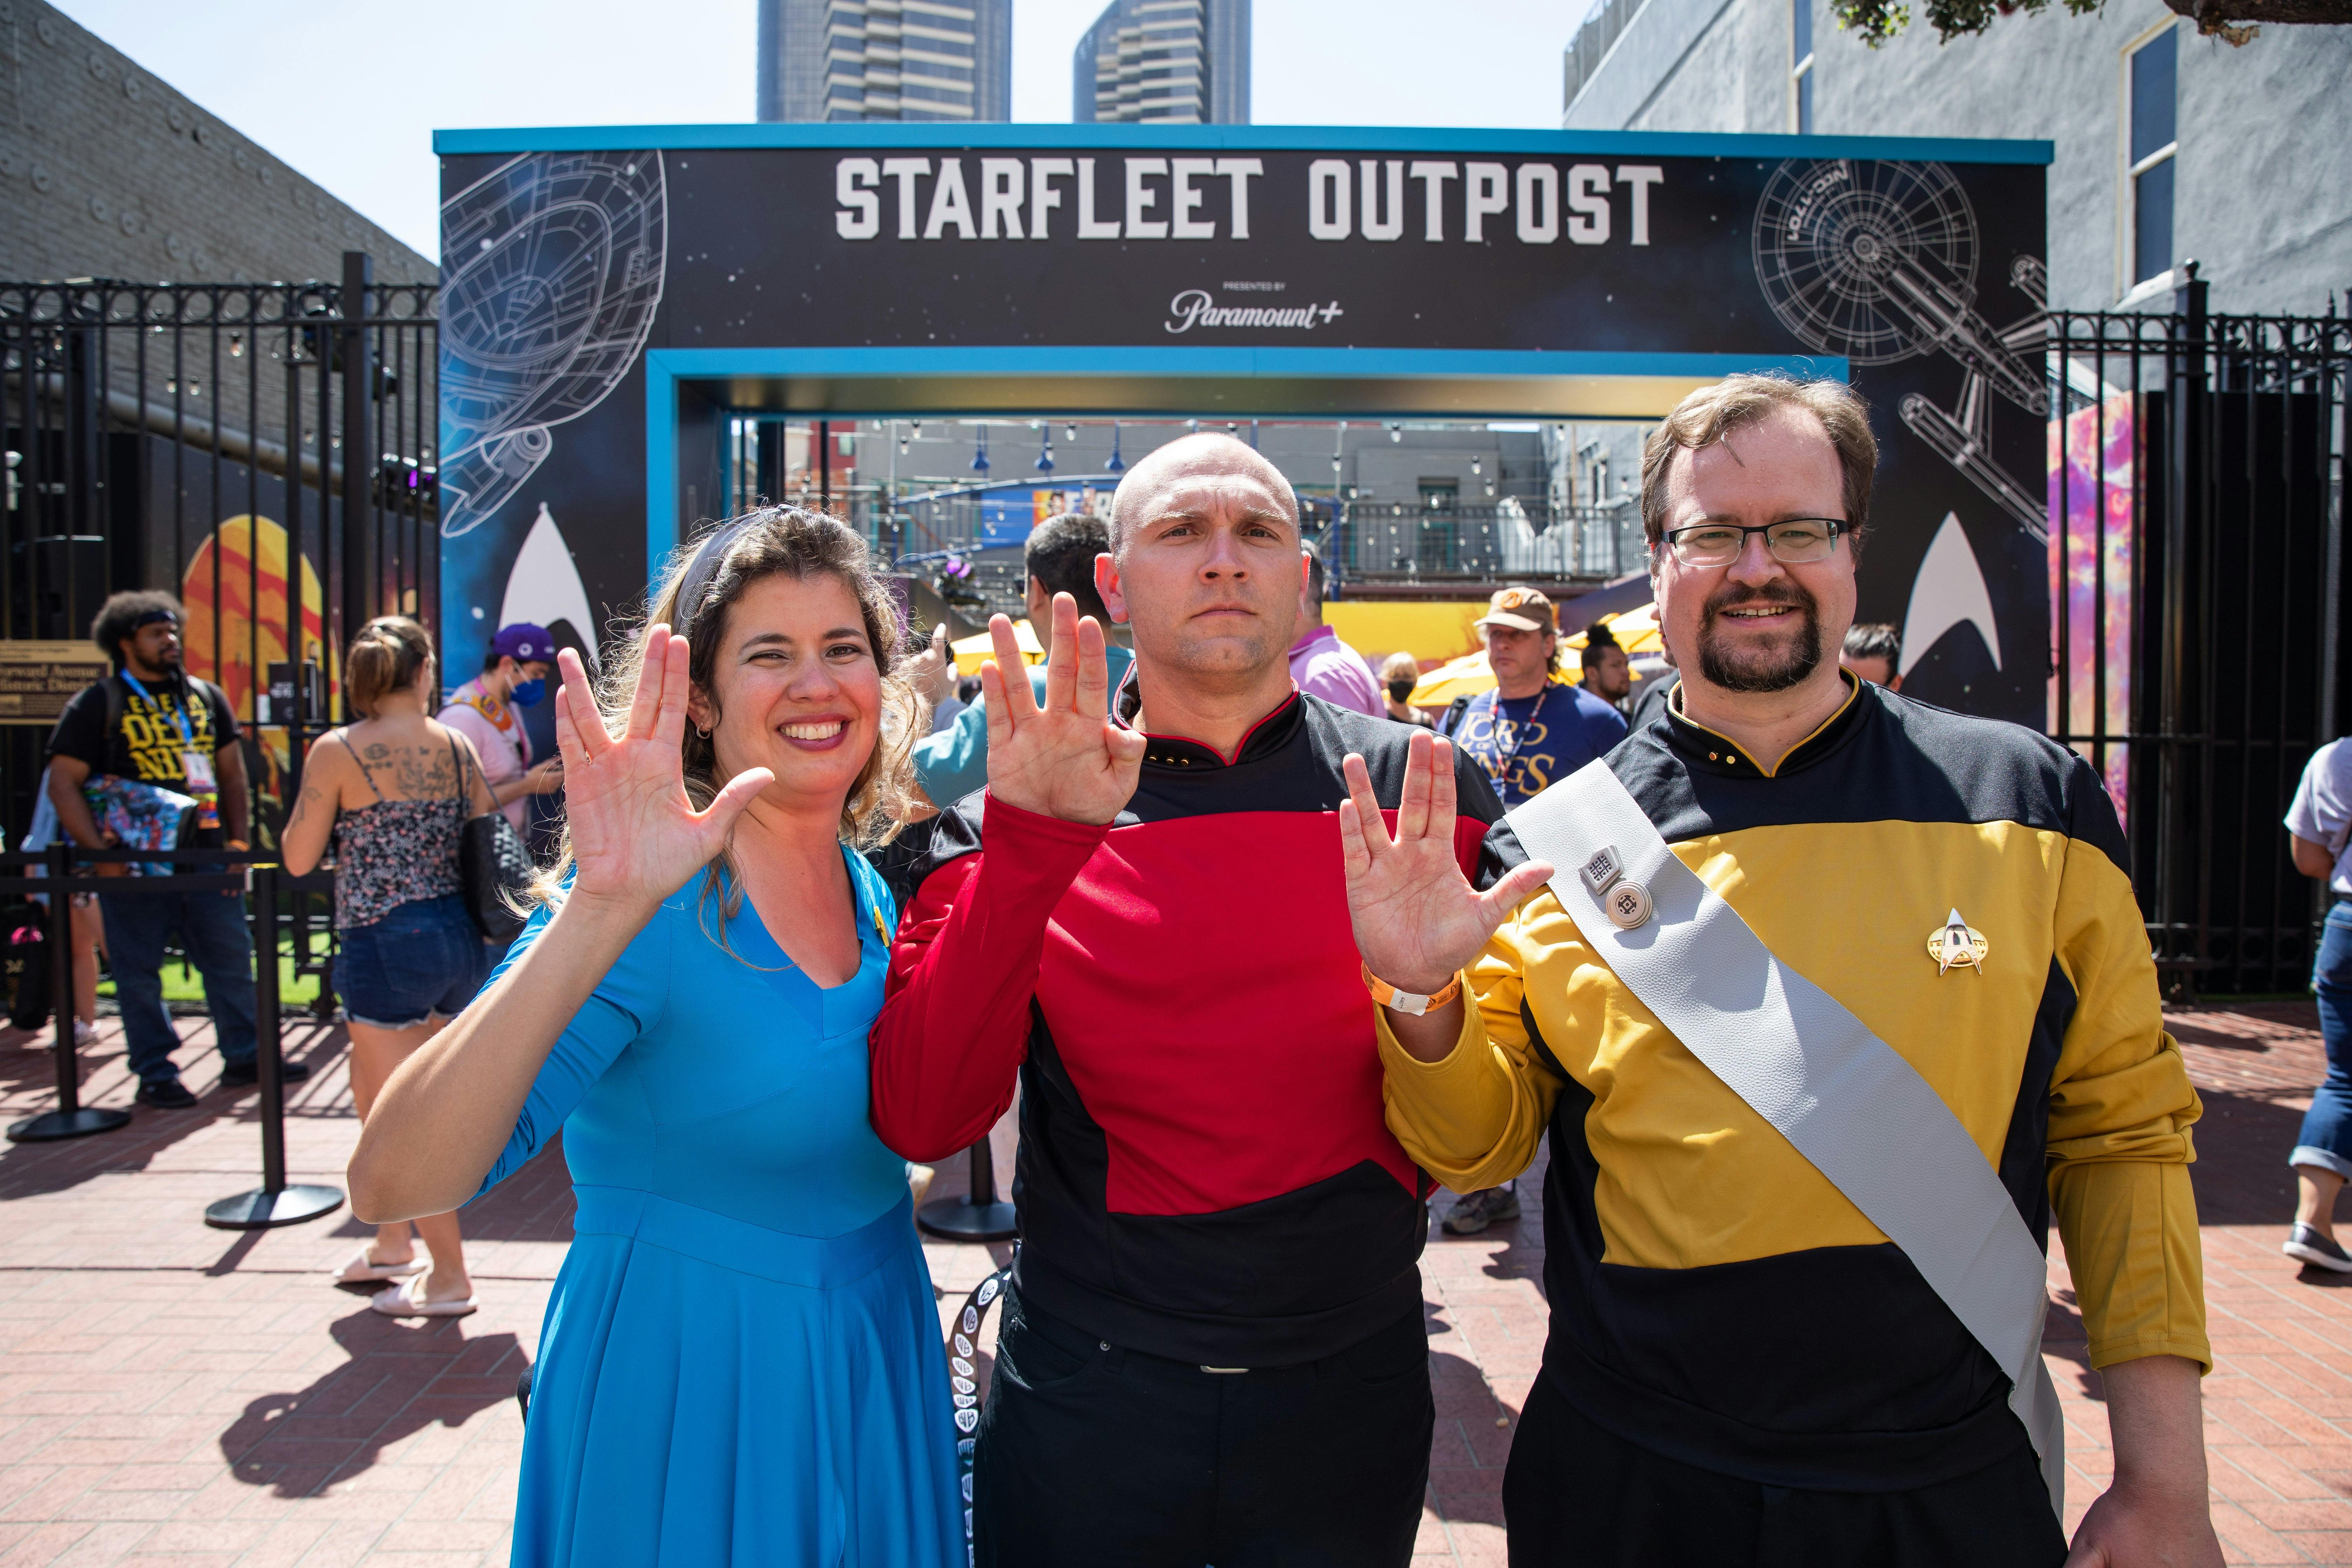 Three fans, in uniform, pose outside of the Starfleet Outpost.